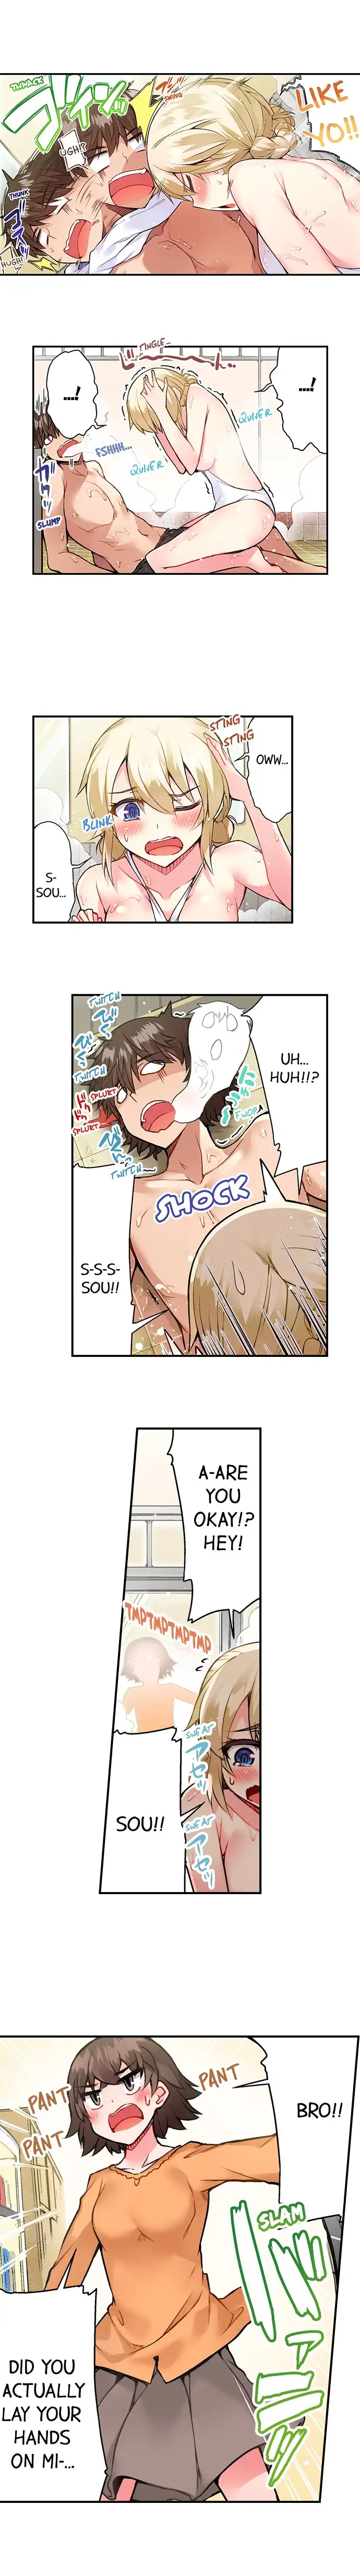 Traditional Job of Washing Girls’ Body - Chapter 62 Page 5